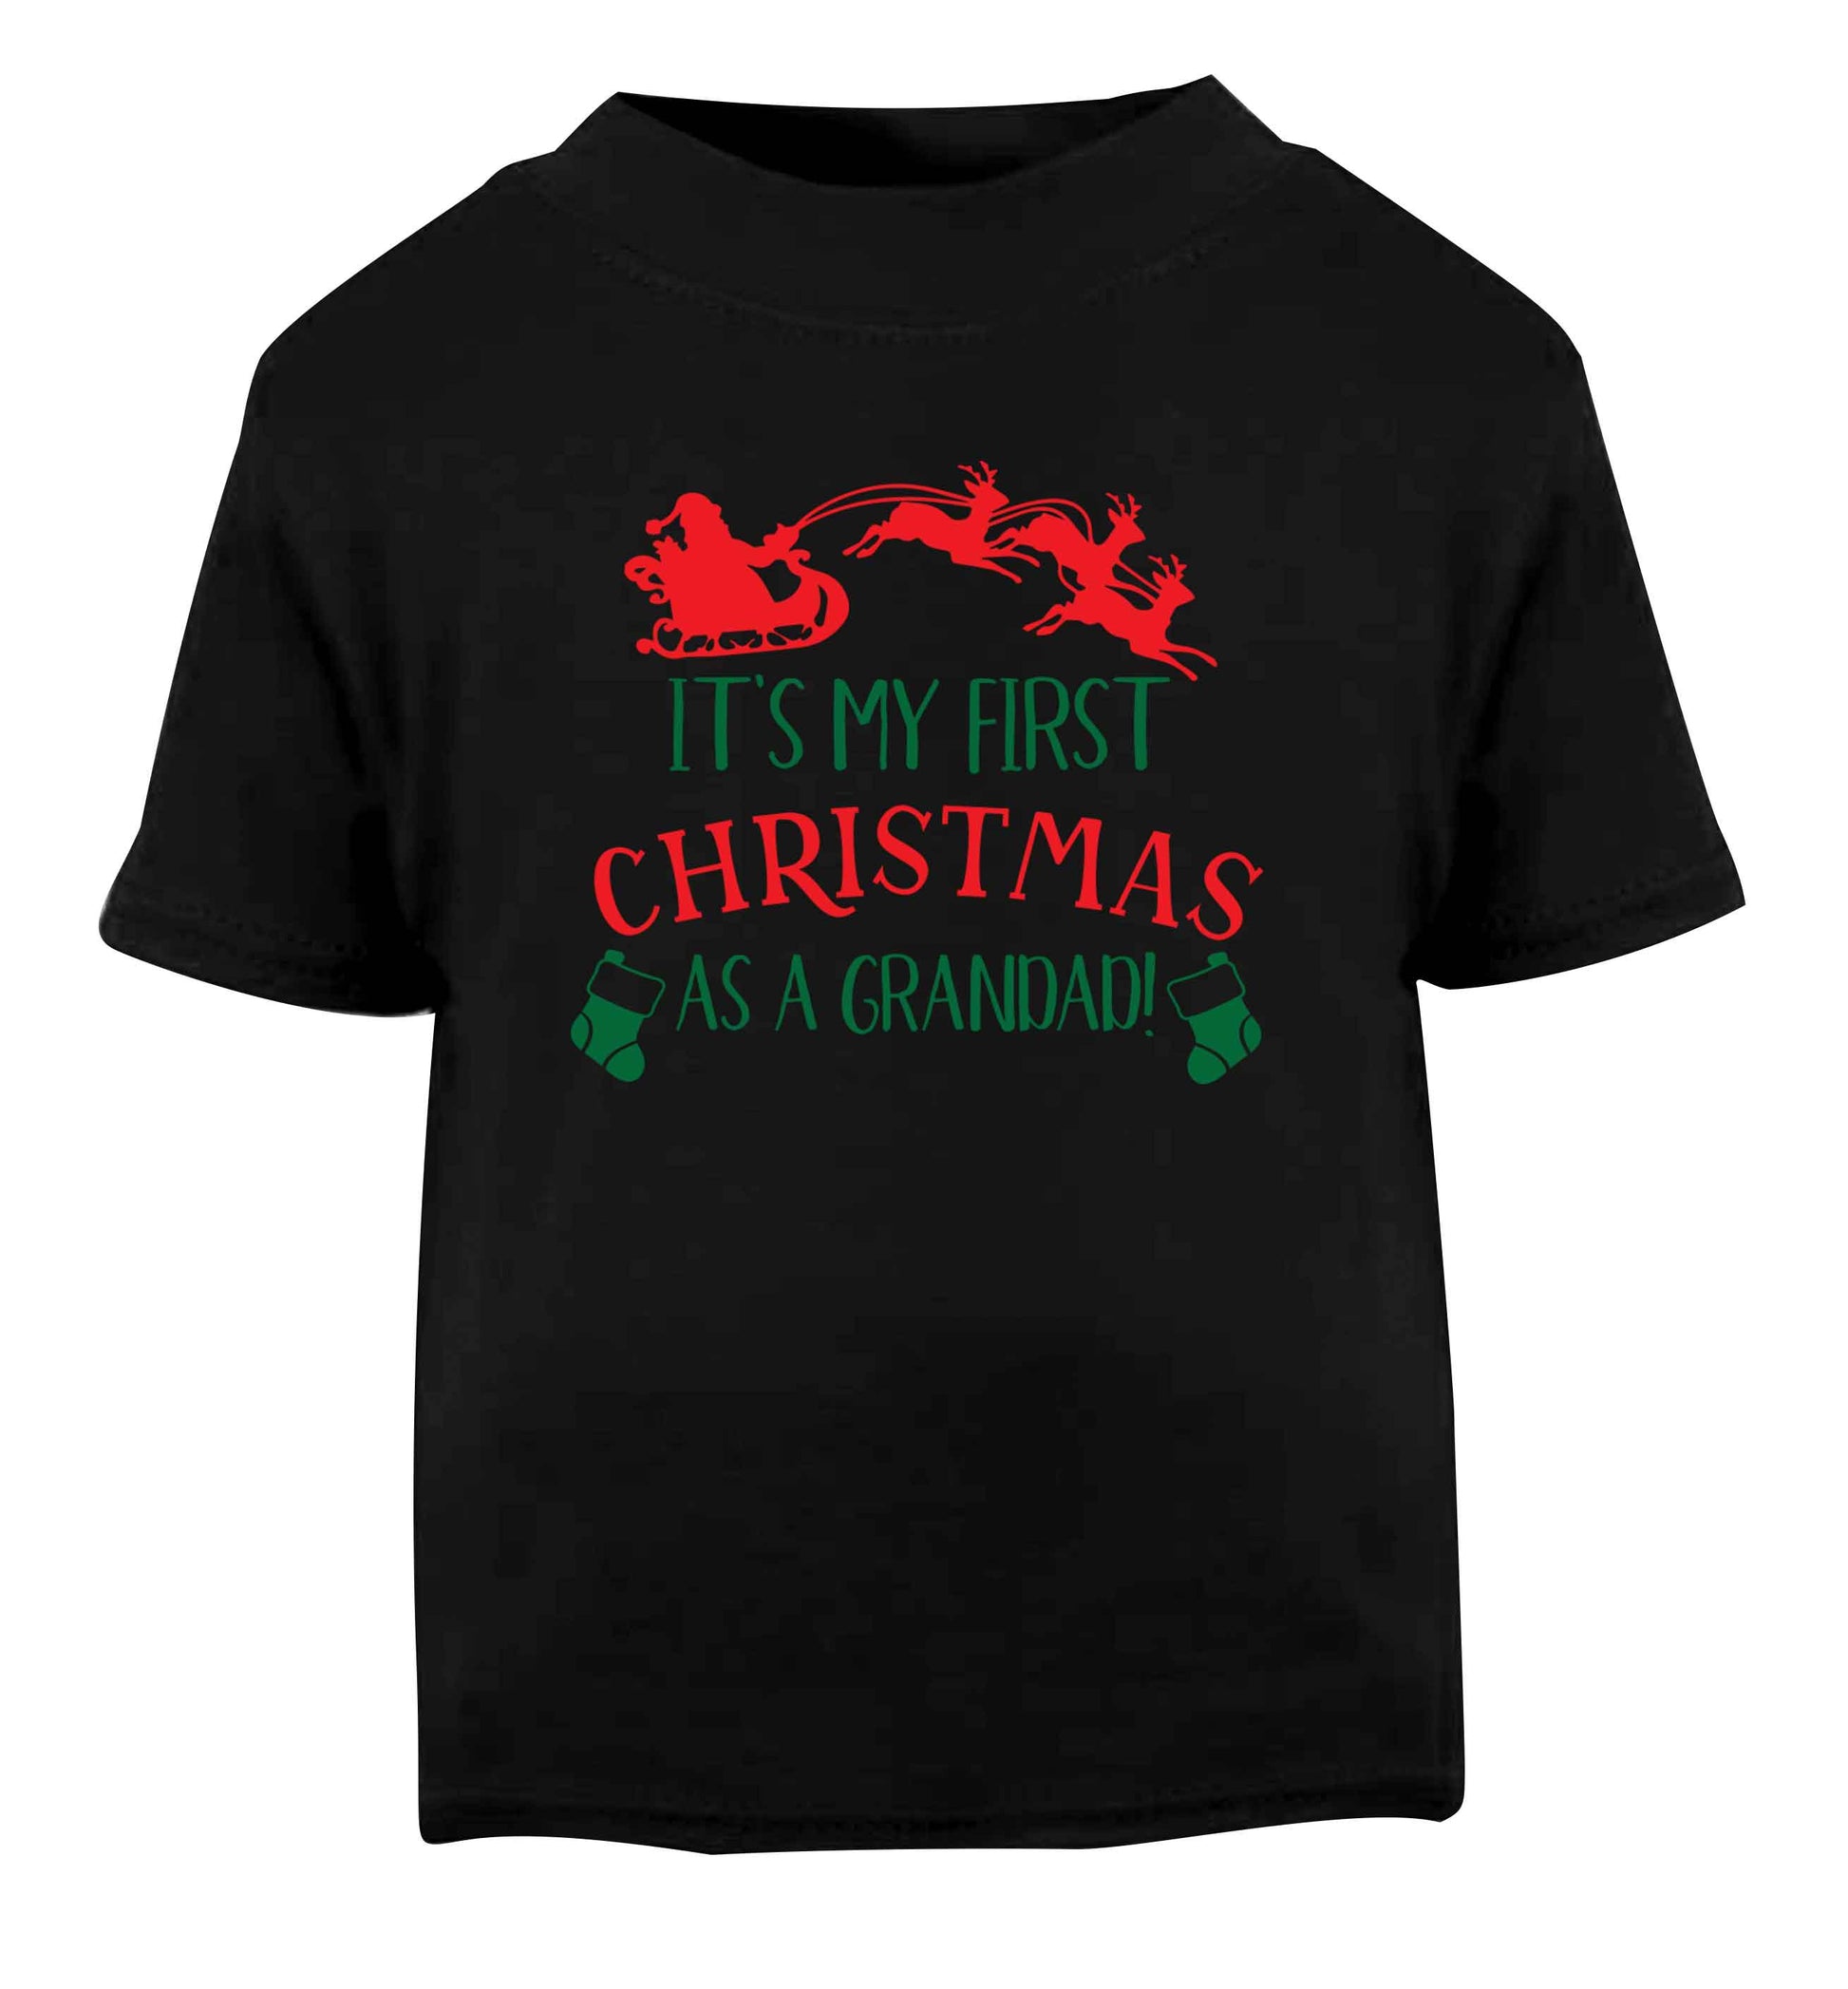 It's my first Christmas as a grandad! Black Baby Toddler Tshirt 2 years